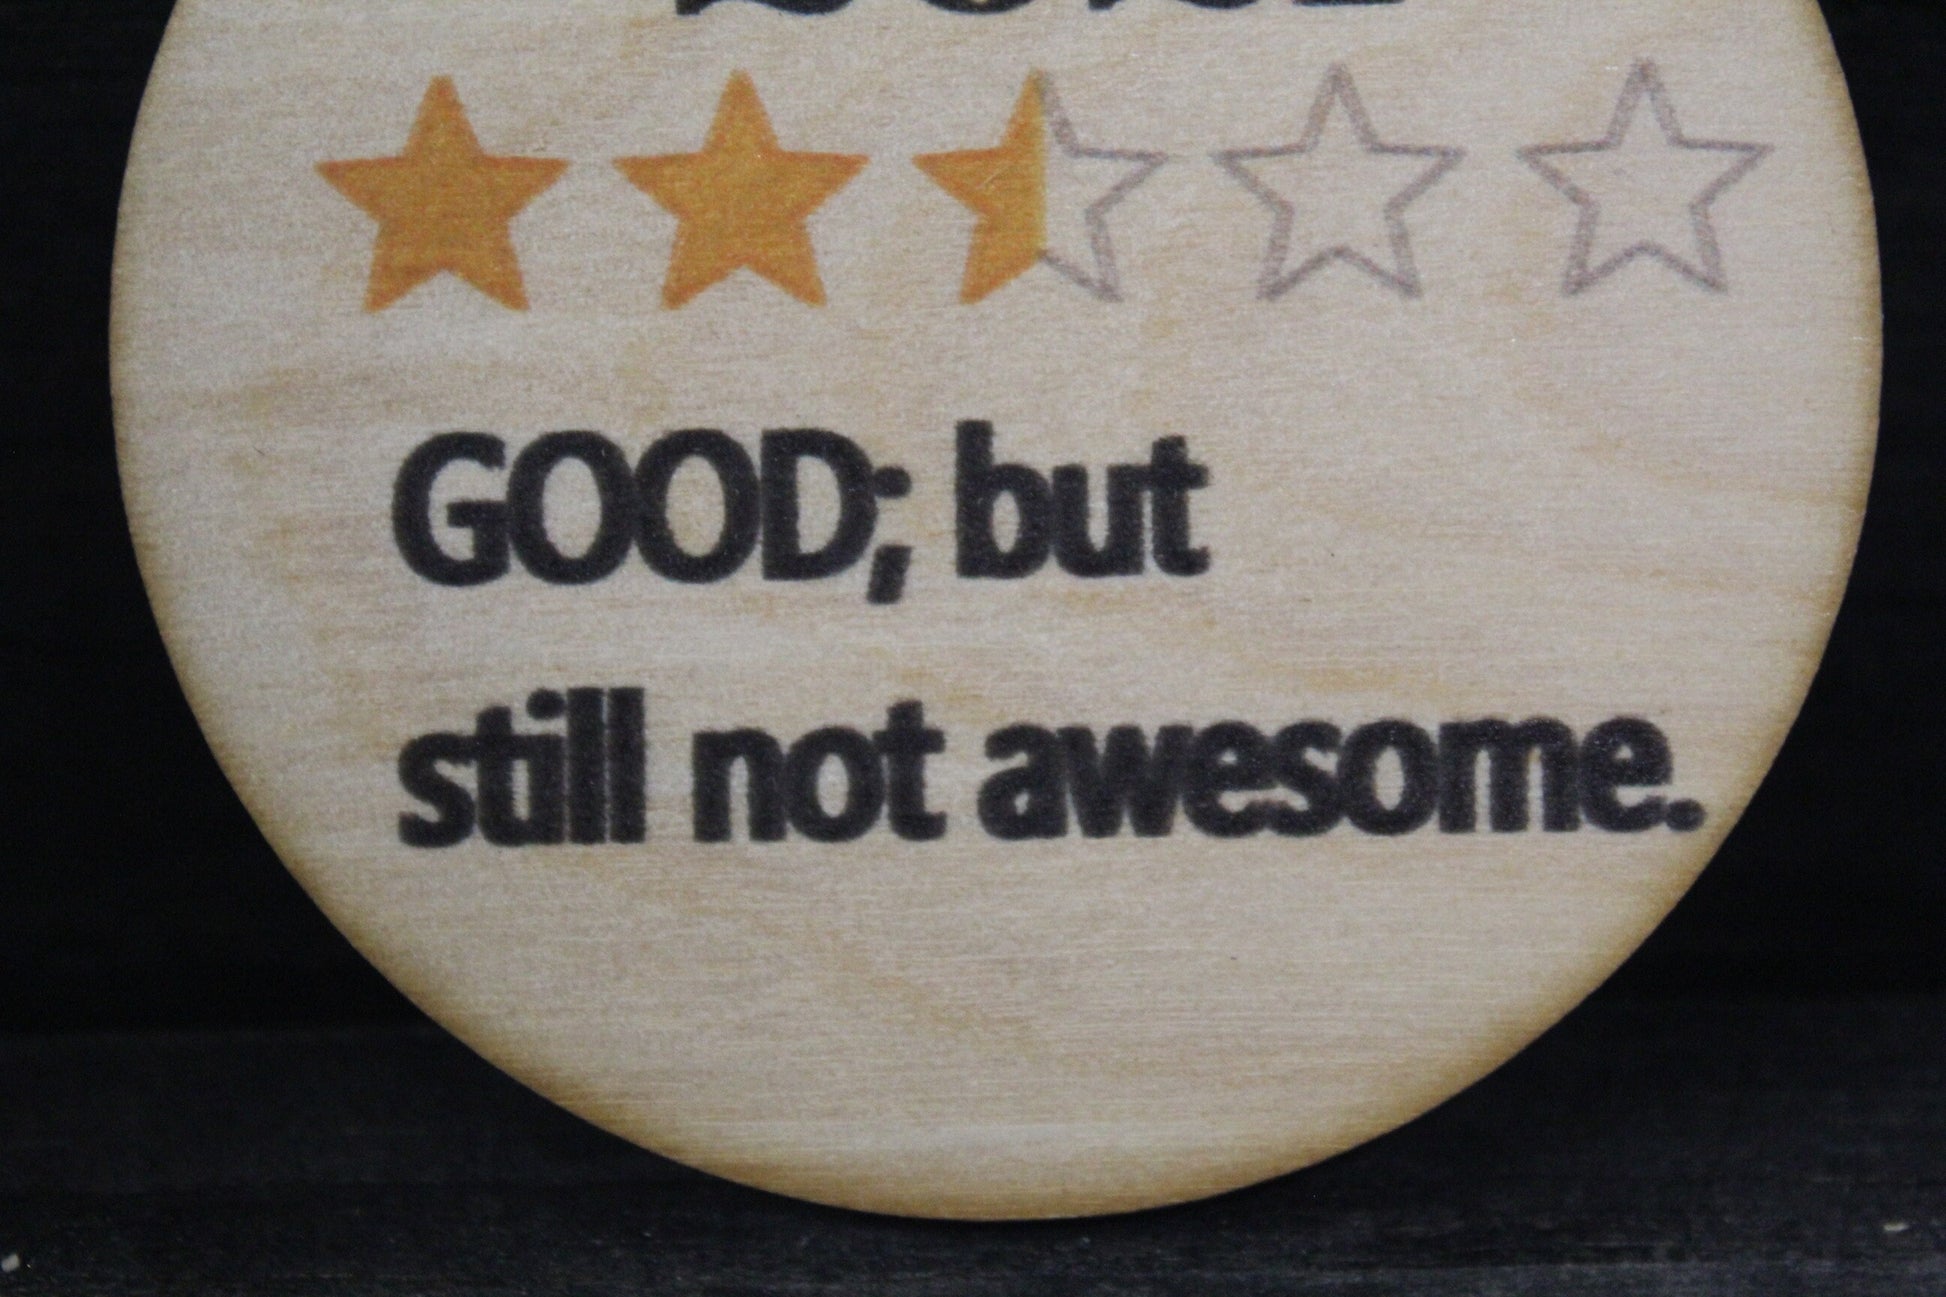 2021 Good But Still Not Awesome Star Rating Ornament Holiday New Year Funny Gift KeyChain Joke Woodslice